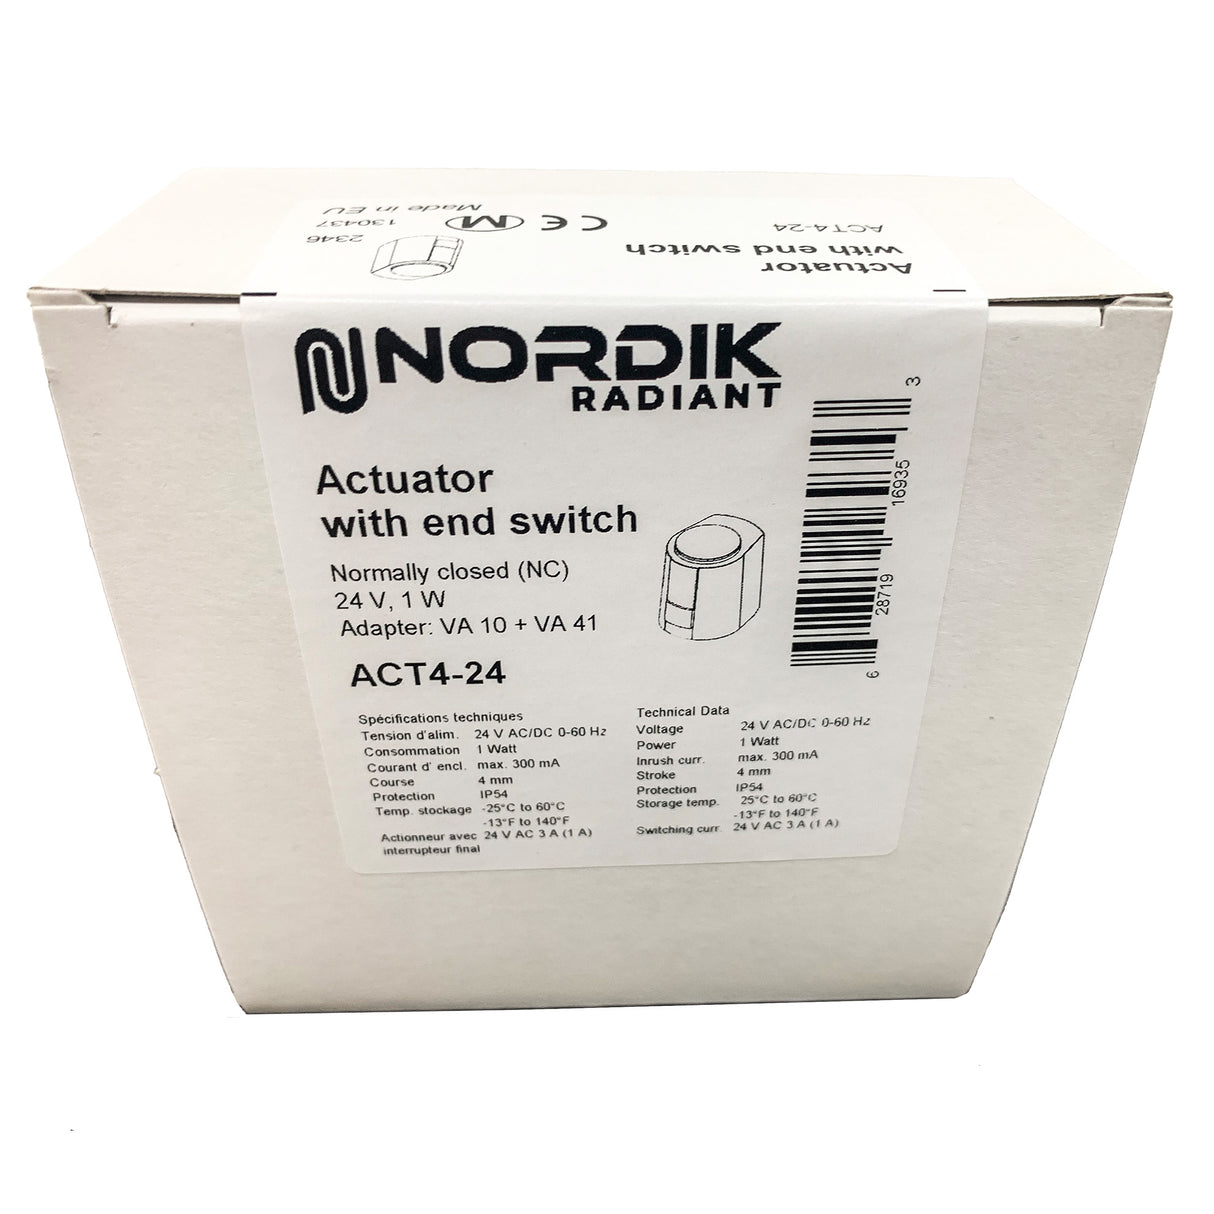 Nordik Radiant 4 wires actuator zone valve for water and glycol radiant floor manifold - box